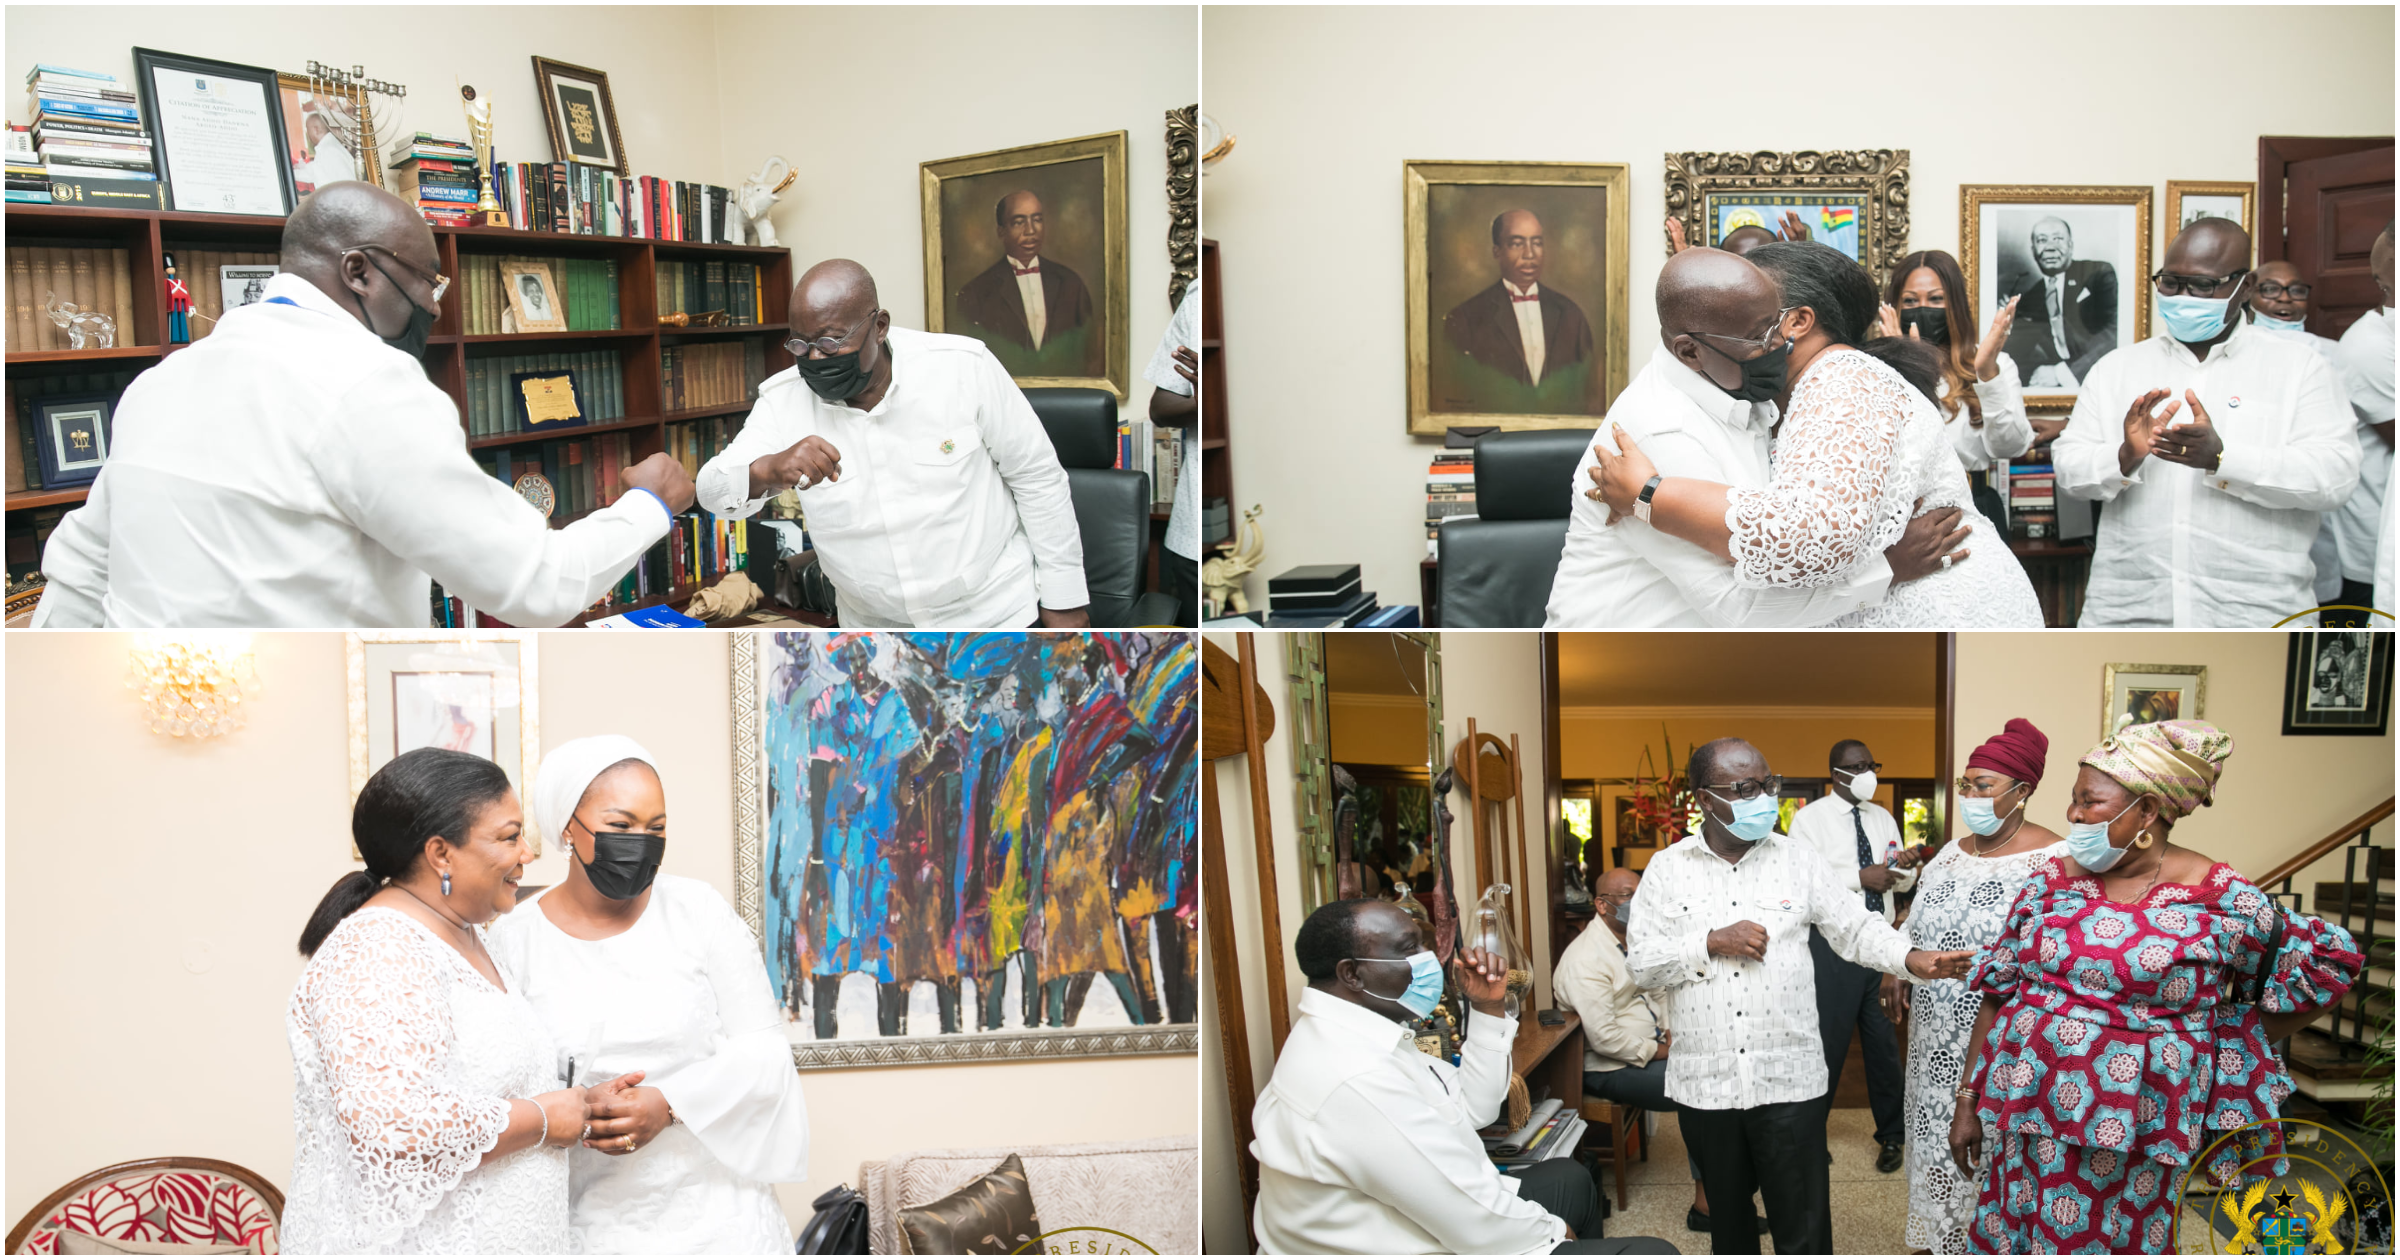 Election 2020: How Akufo-Addo celebrated with family, friends, supporters after victory (photos)